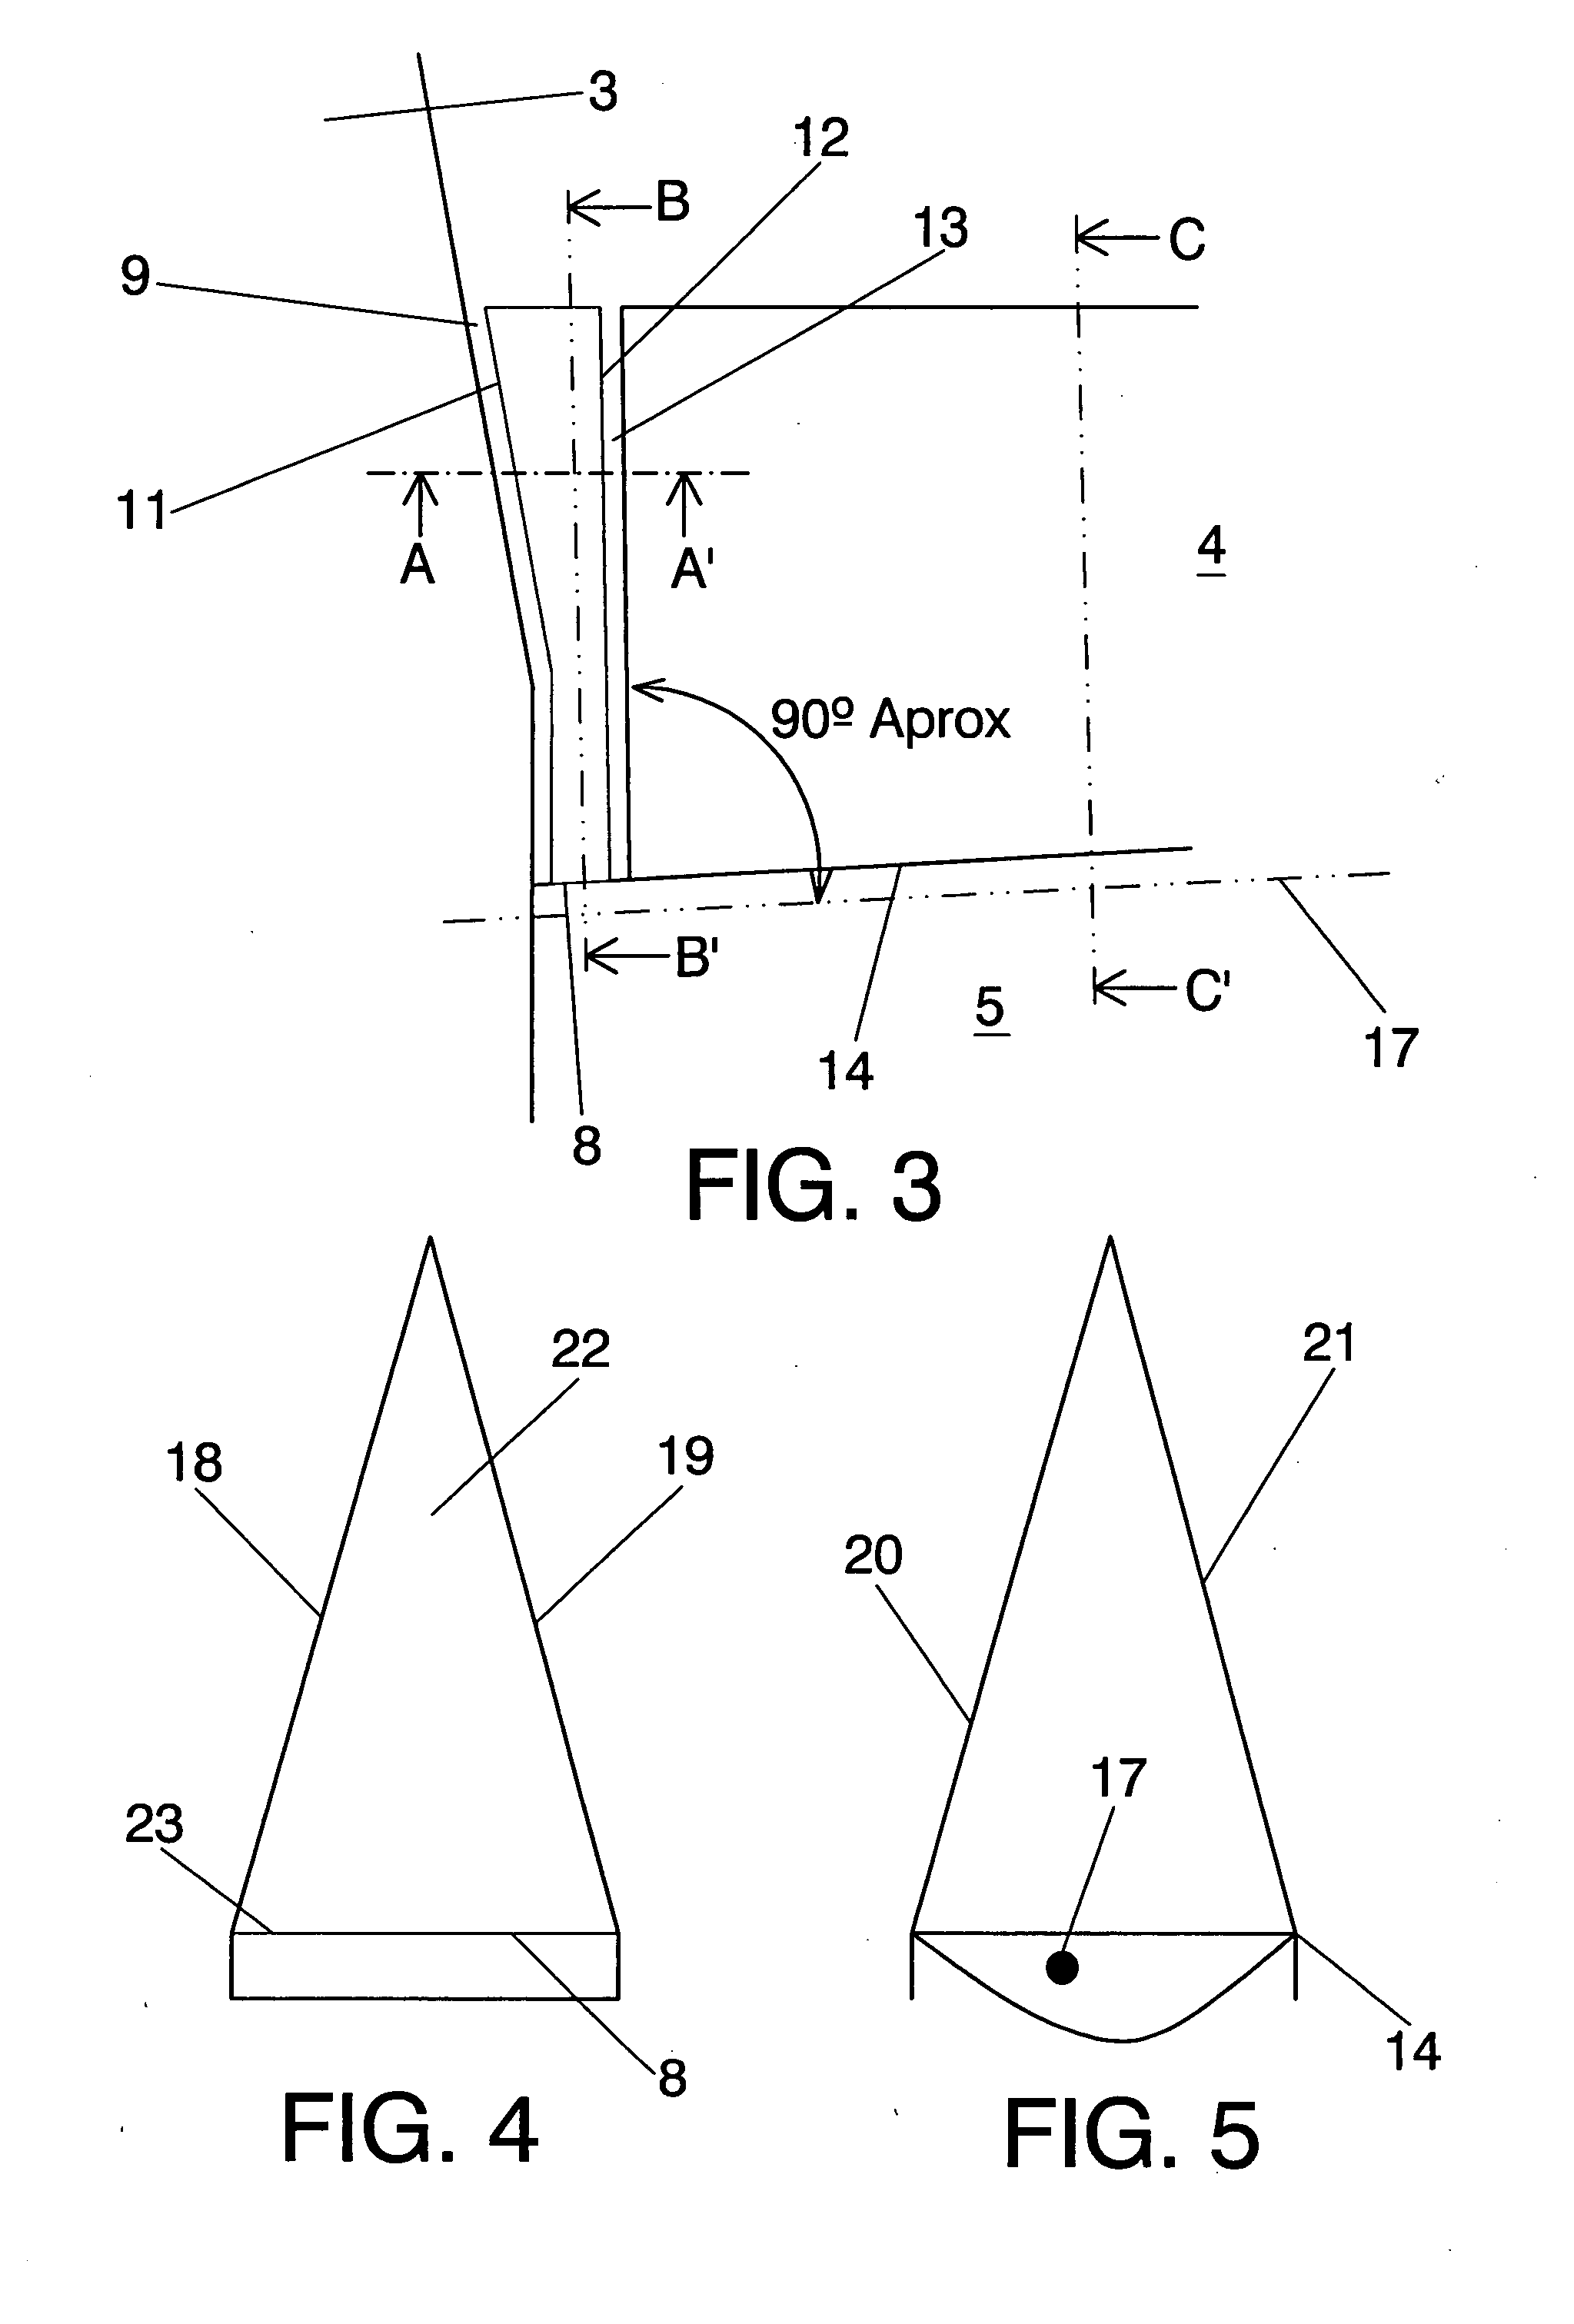 Sealing system for the gap existing between the fuselage and the elevator of an aircraft with orientable horizontal stabiliser